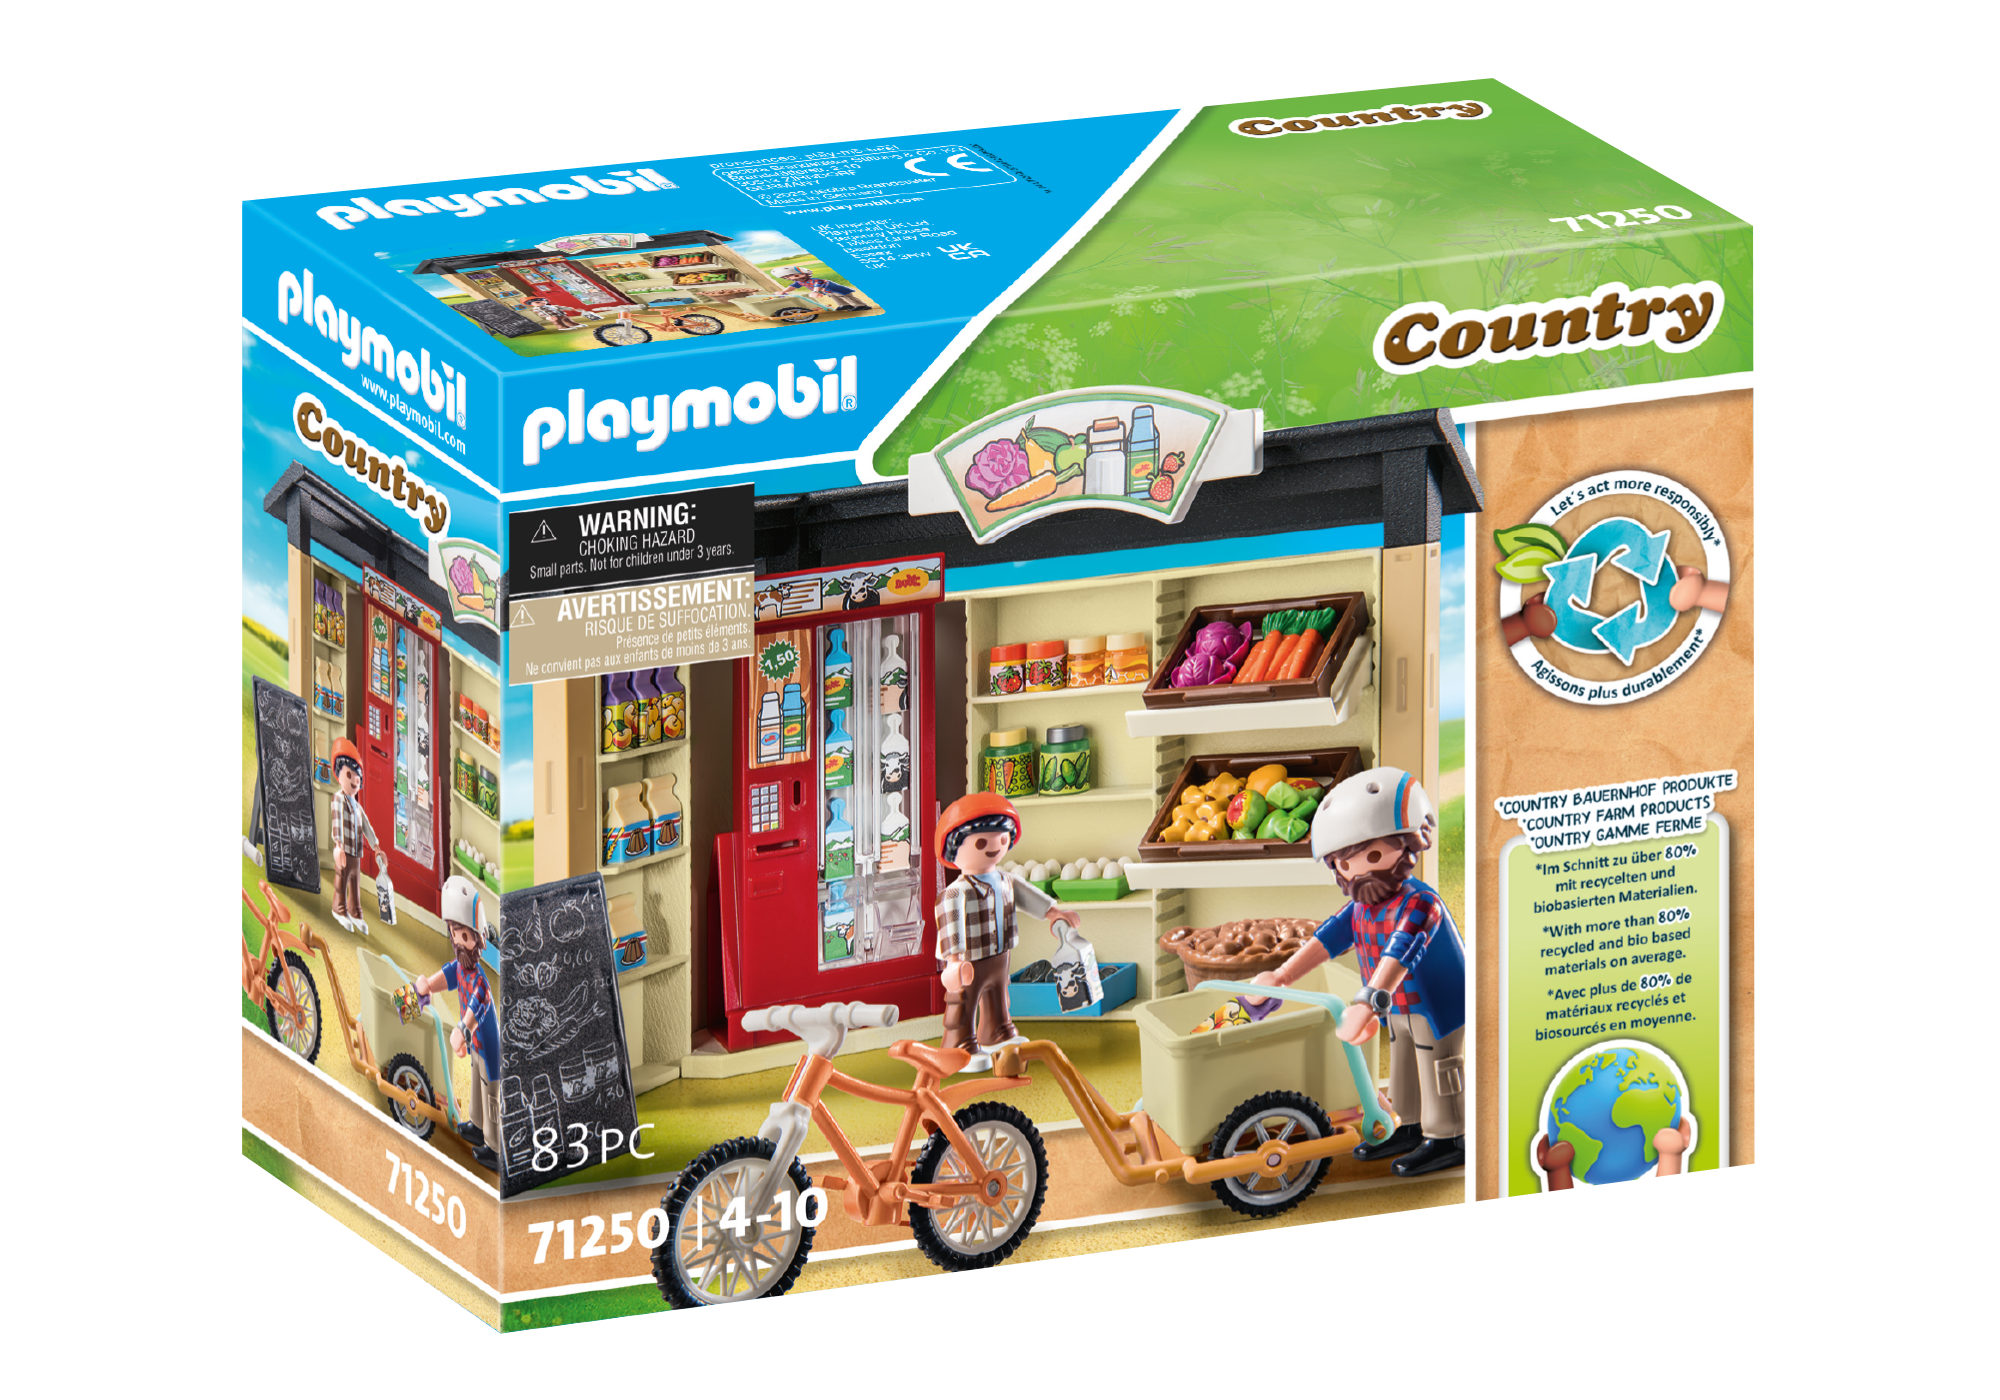 PLAYMOBIL 71238 COUNTRY - Riding Stable